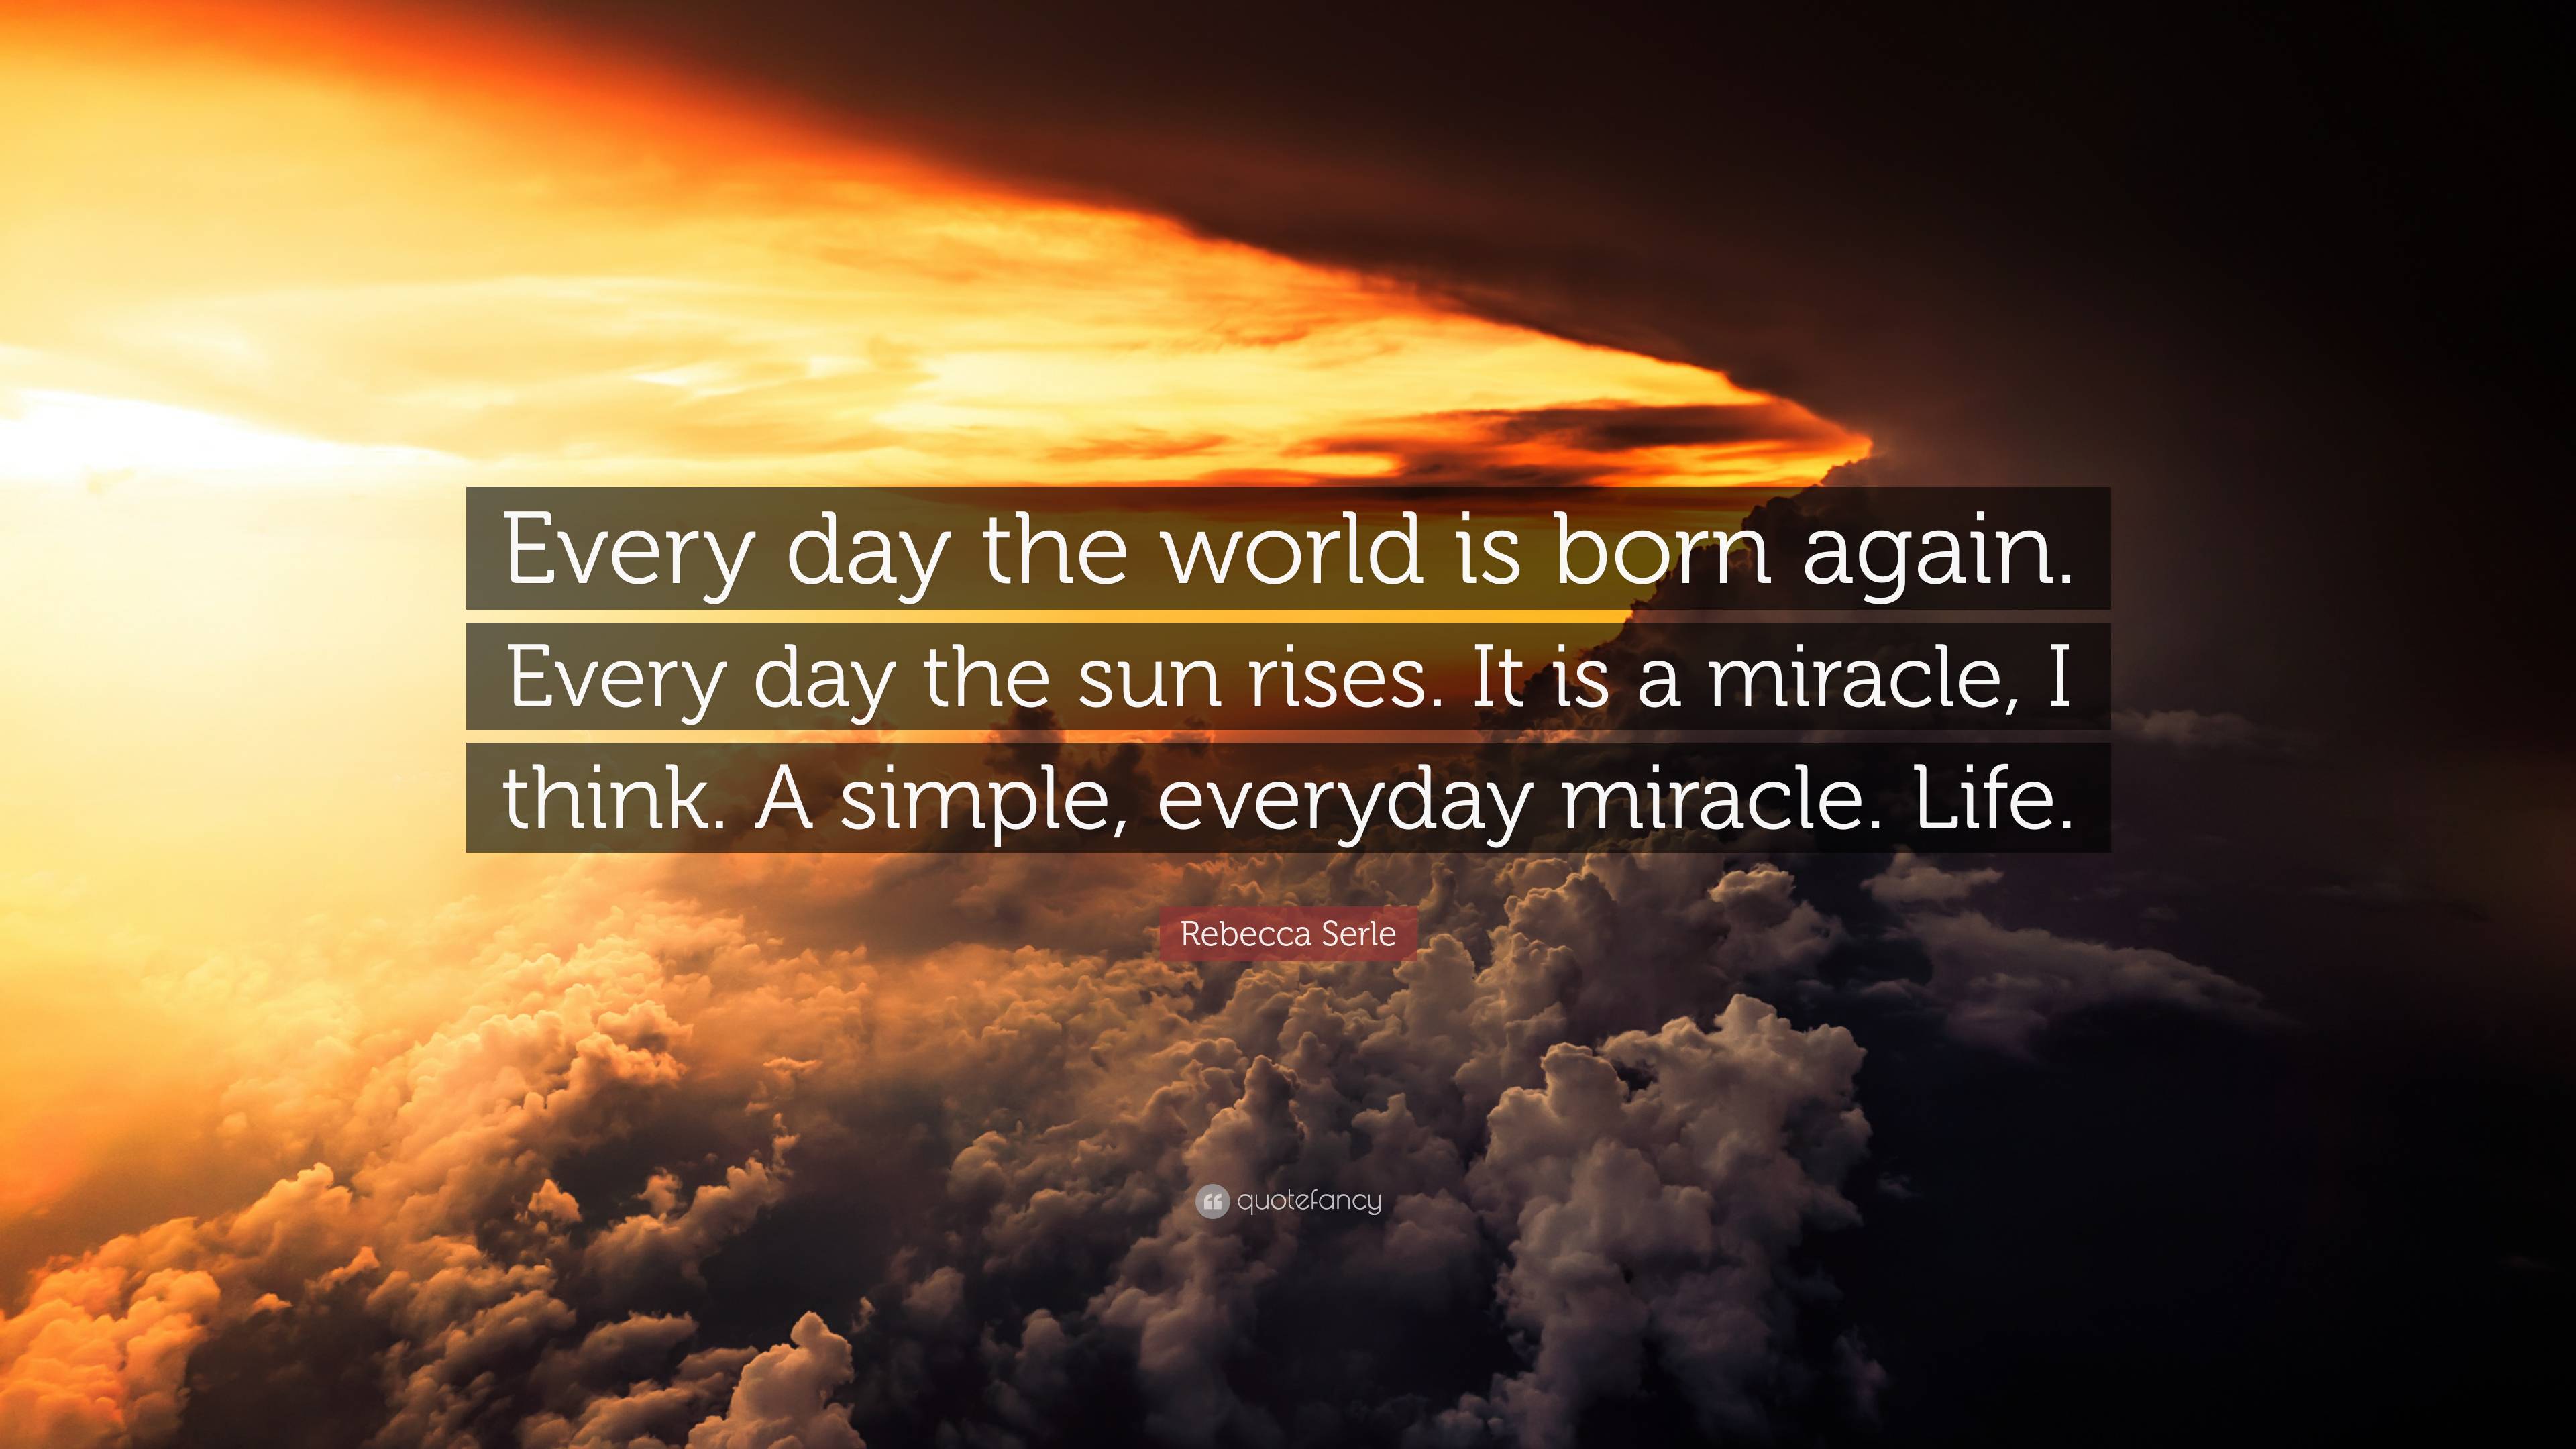 https://quotefancy.com/media/wallpaper/3840x2160/7203001-Rebecca-Serle-Quote-Every-day-the-world-is-born-again-Every-day.jpg